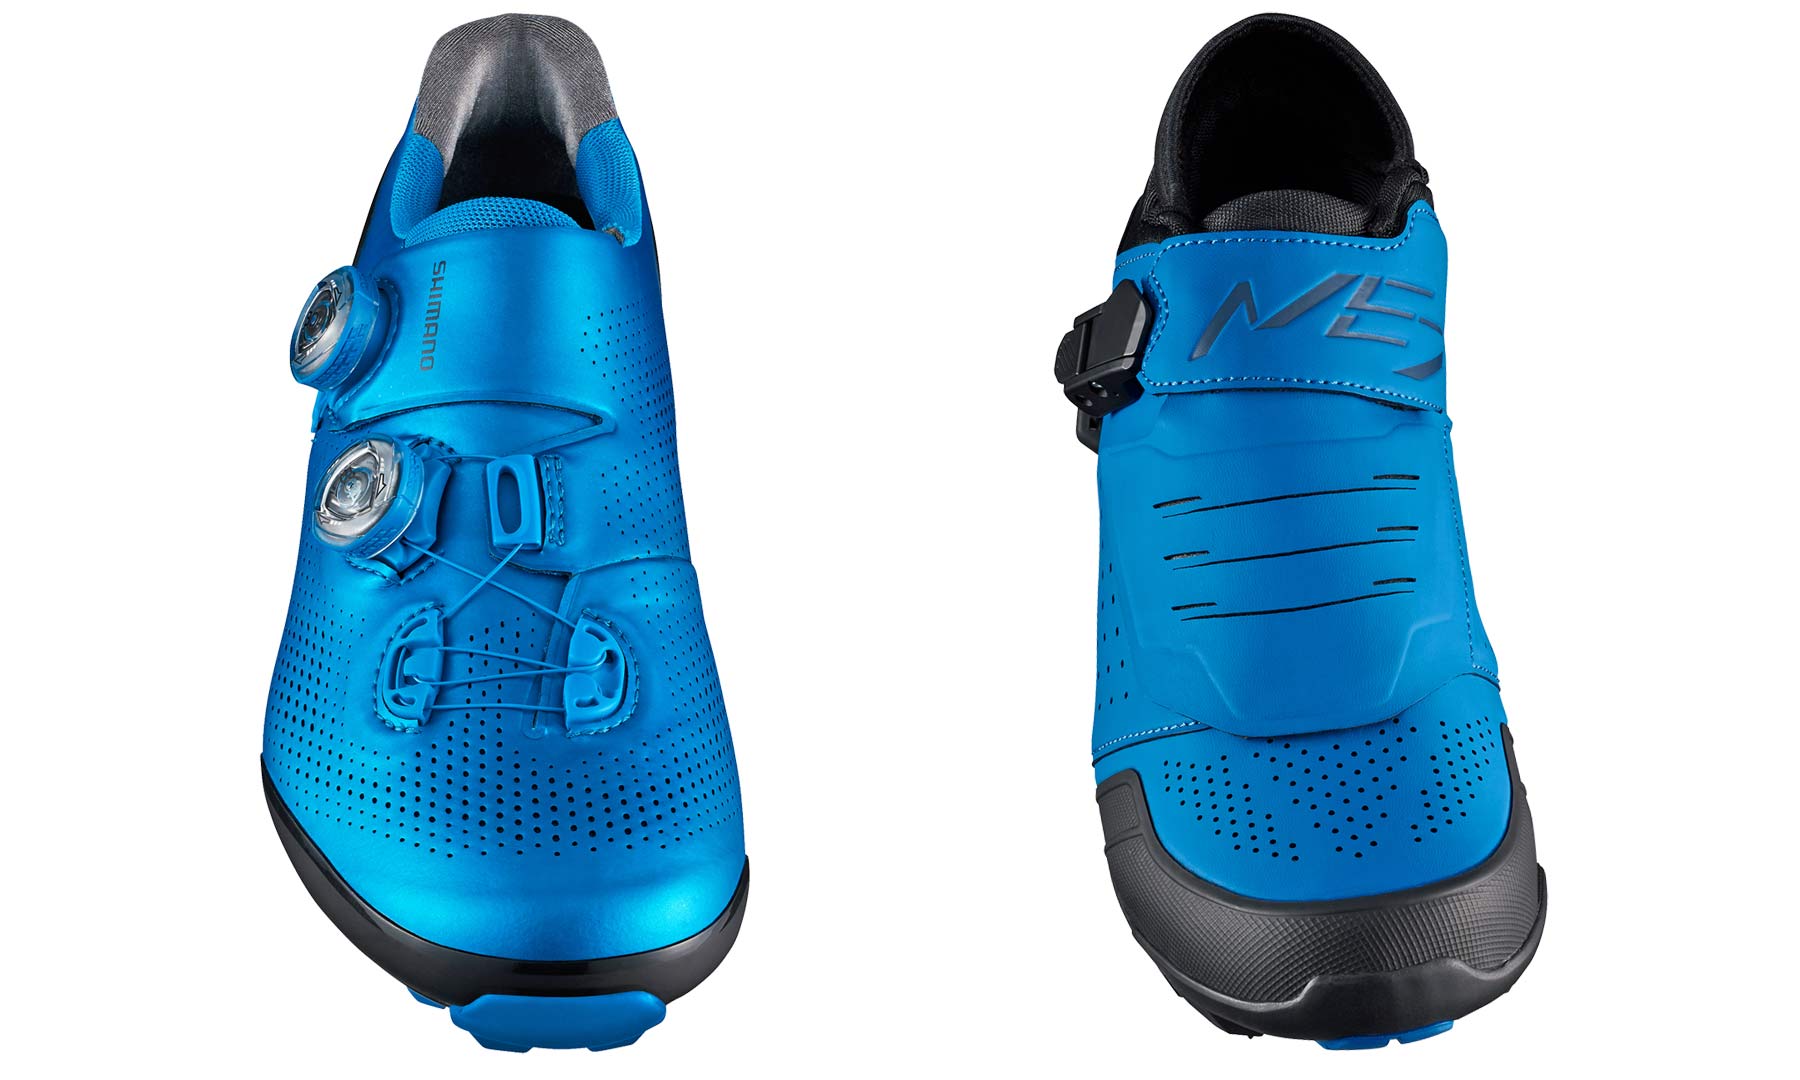 Shimano evolves 2019 S-Phyre XC9 & ME7 mountain bike shoes with 